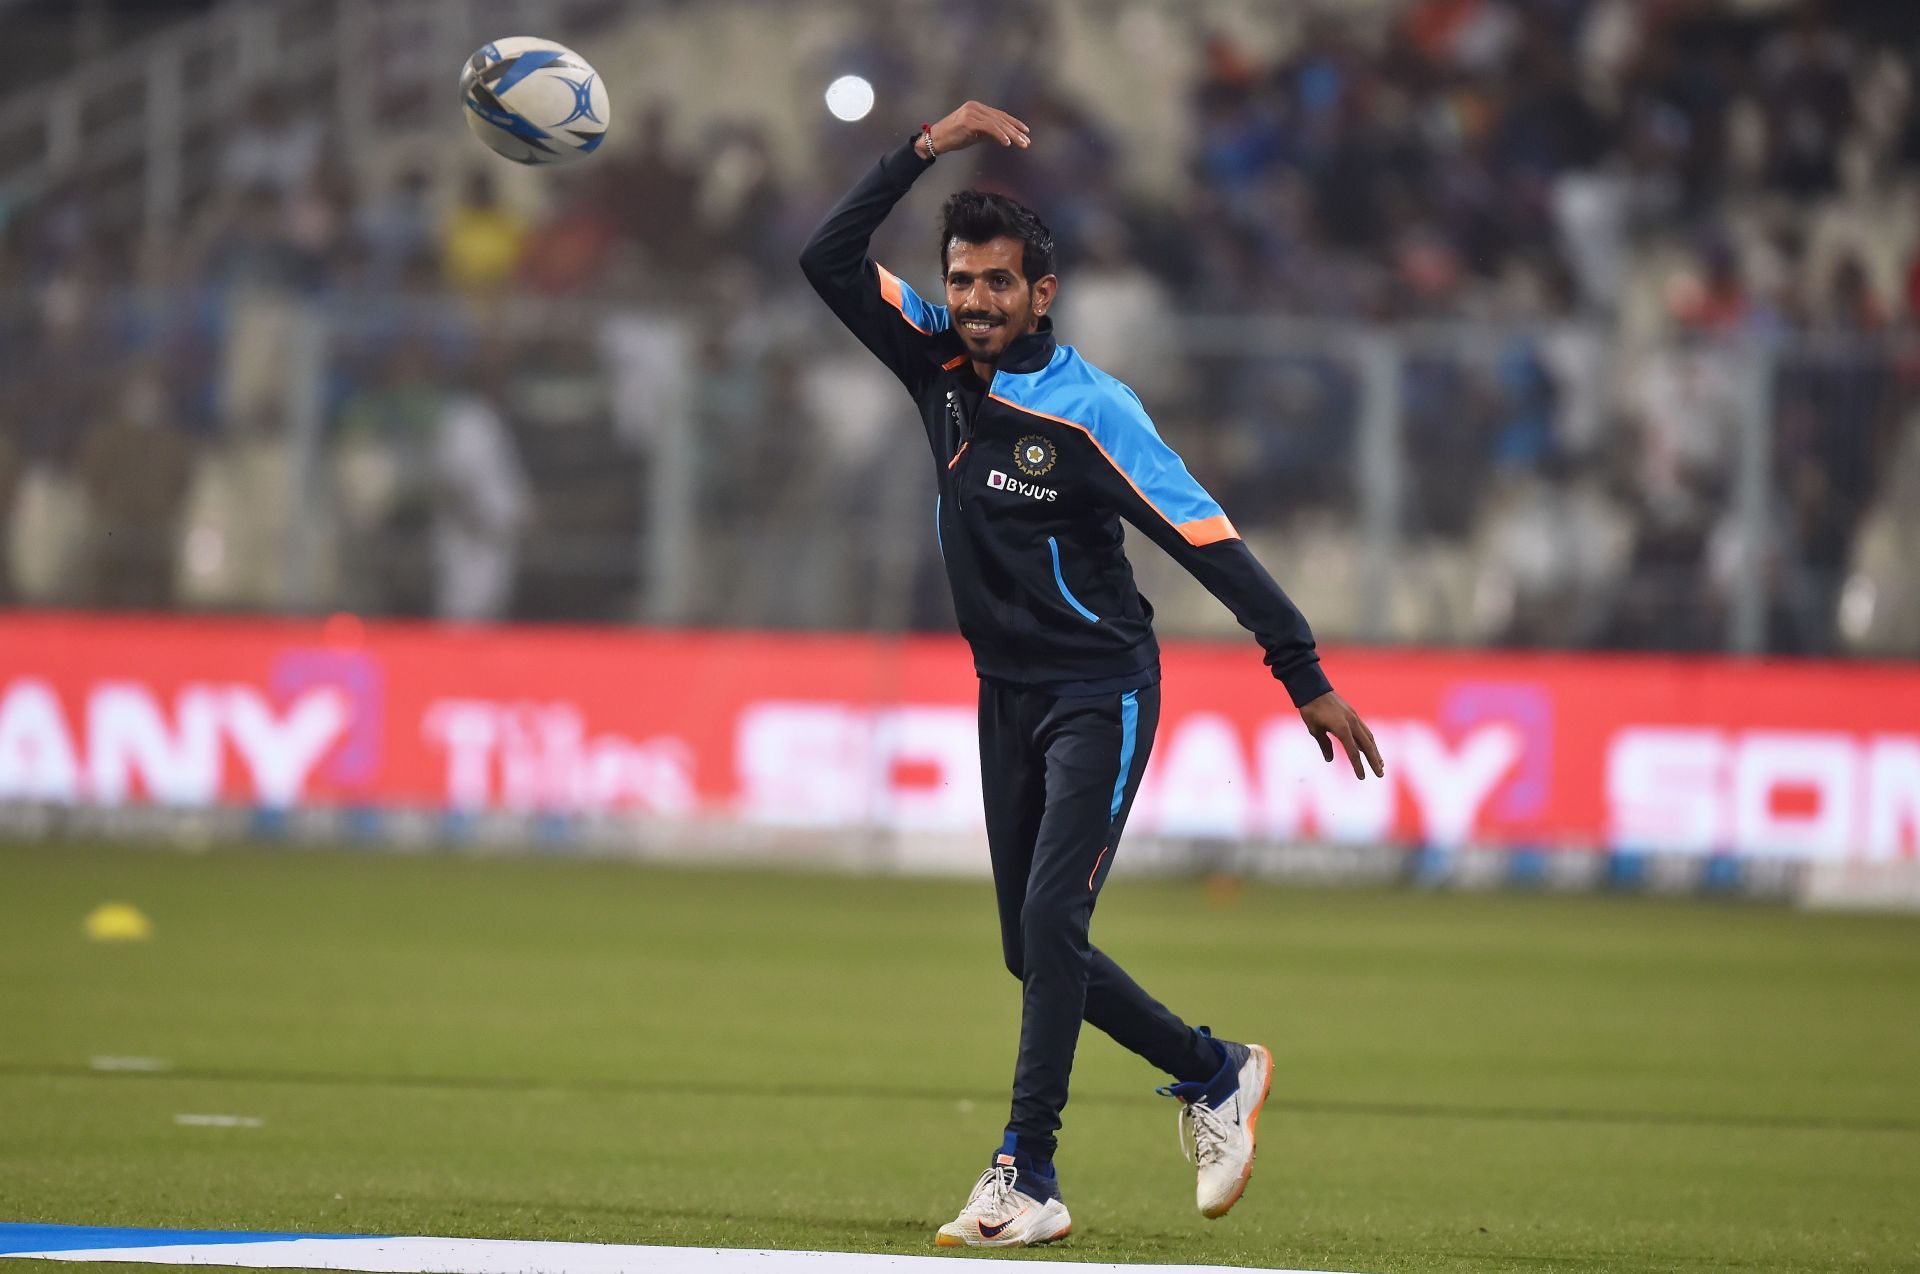 Chahal found form in the ODI series